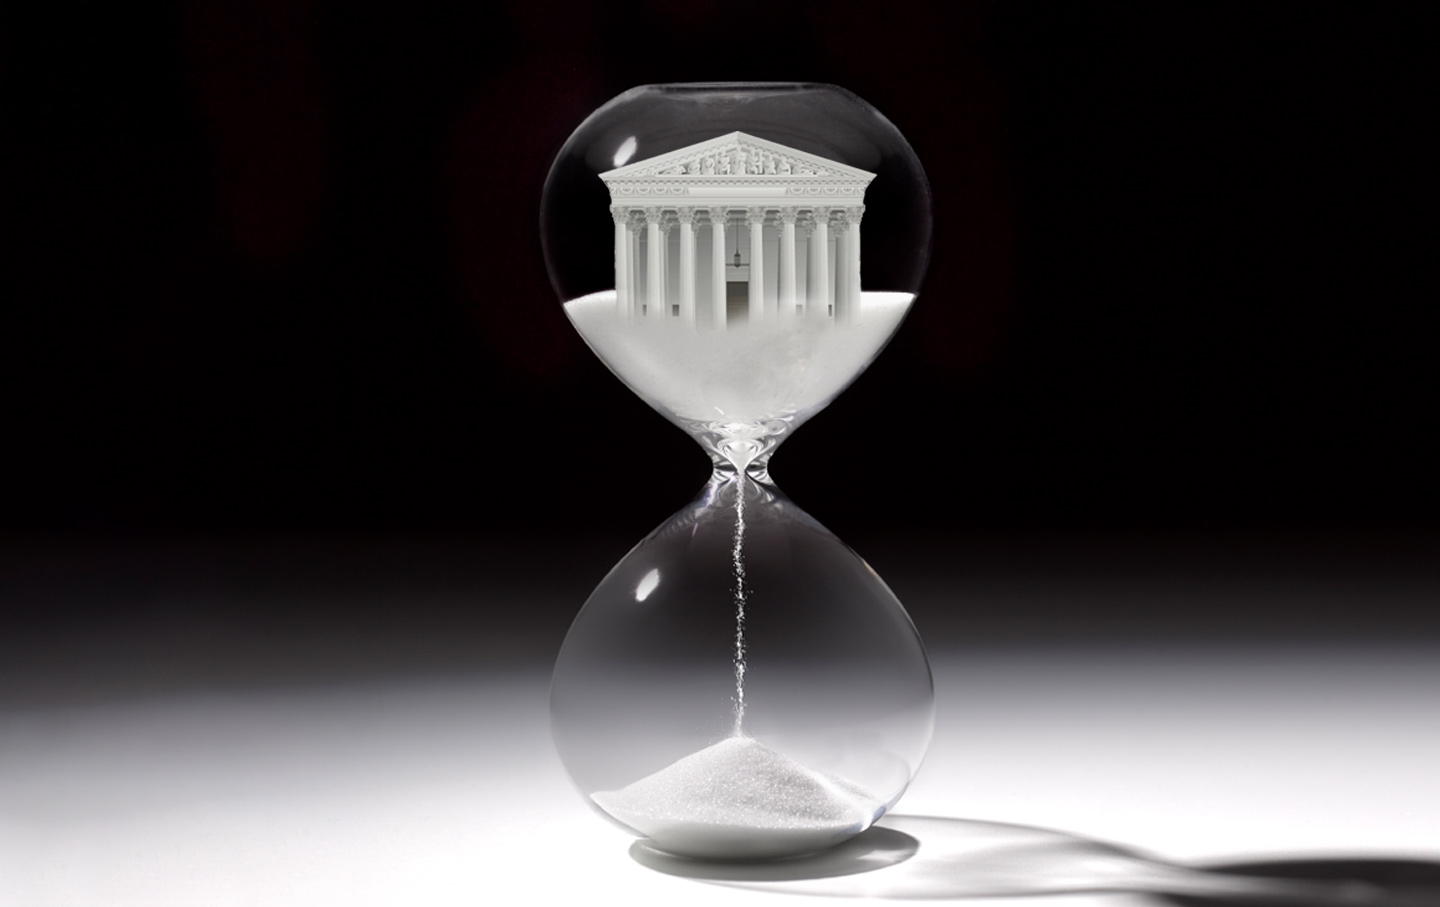 Photo illustration of the Supreme Court building as sand in an hourglass running out)